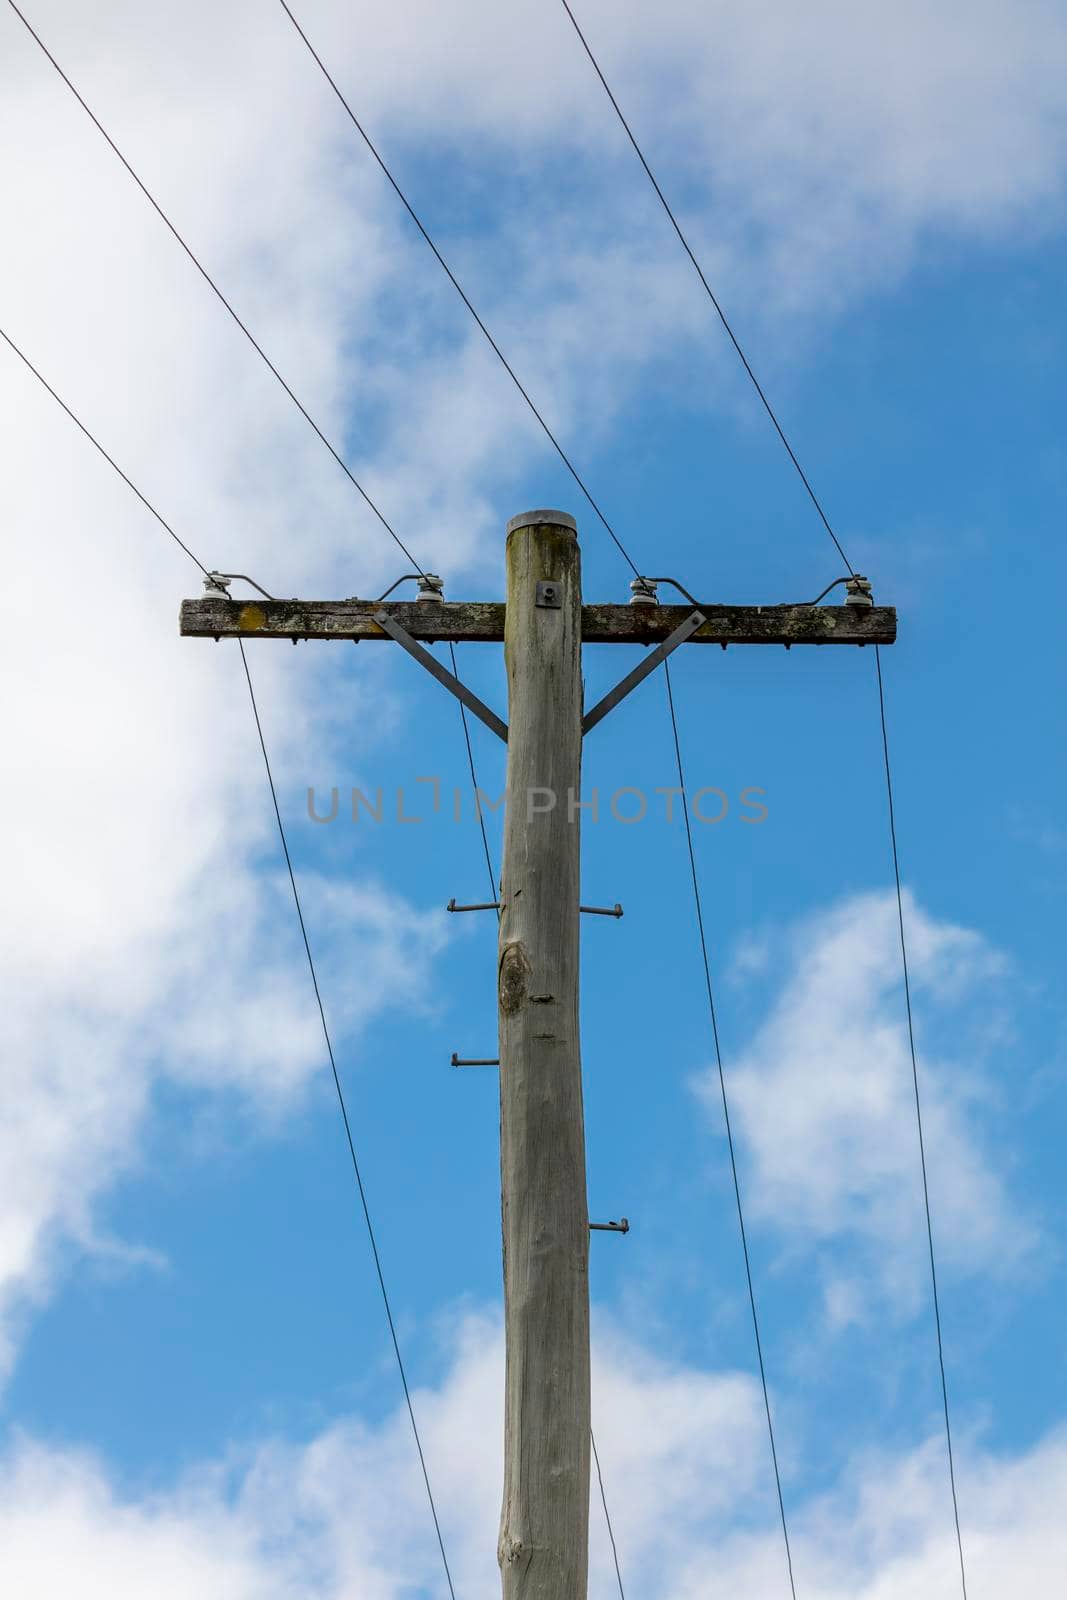 A wooden telephone pole with wires and terminal connectors by WittkePhotos